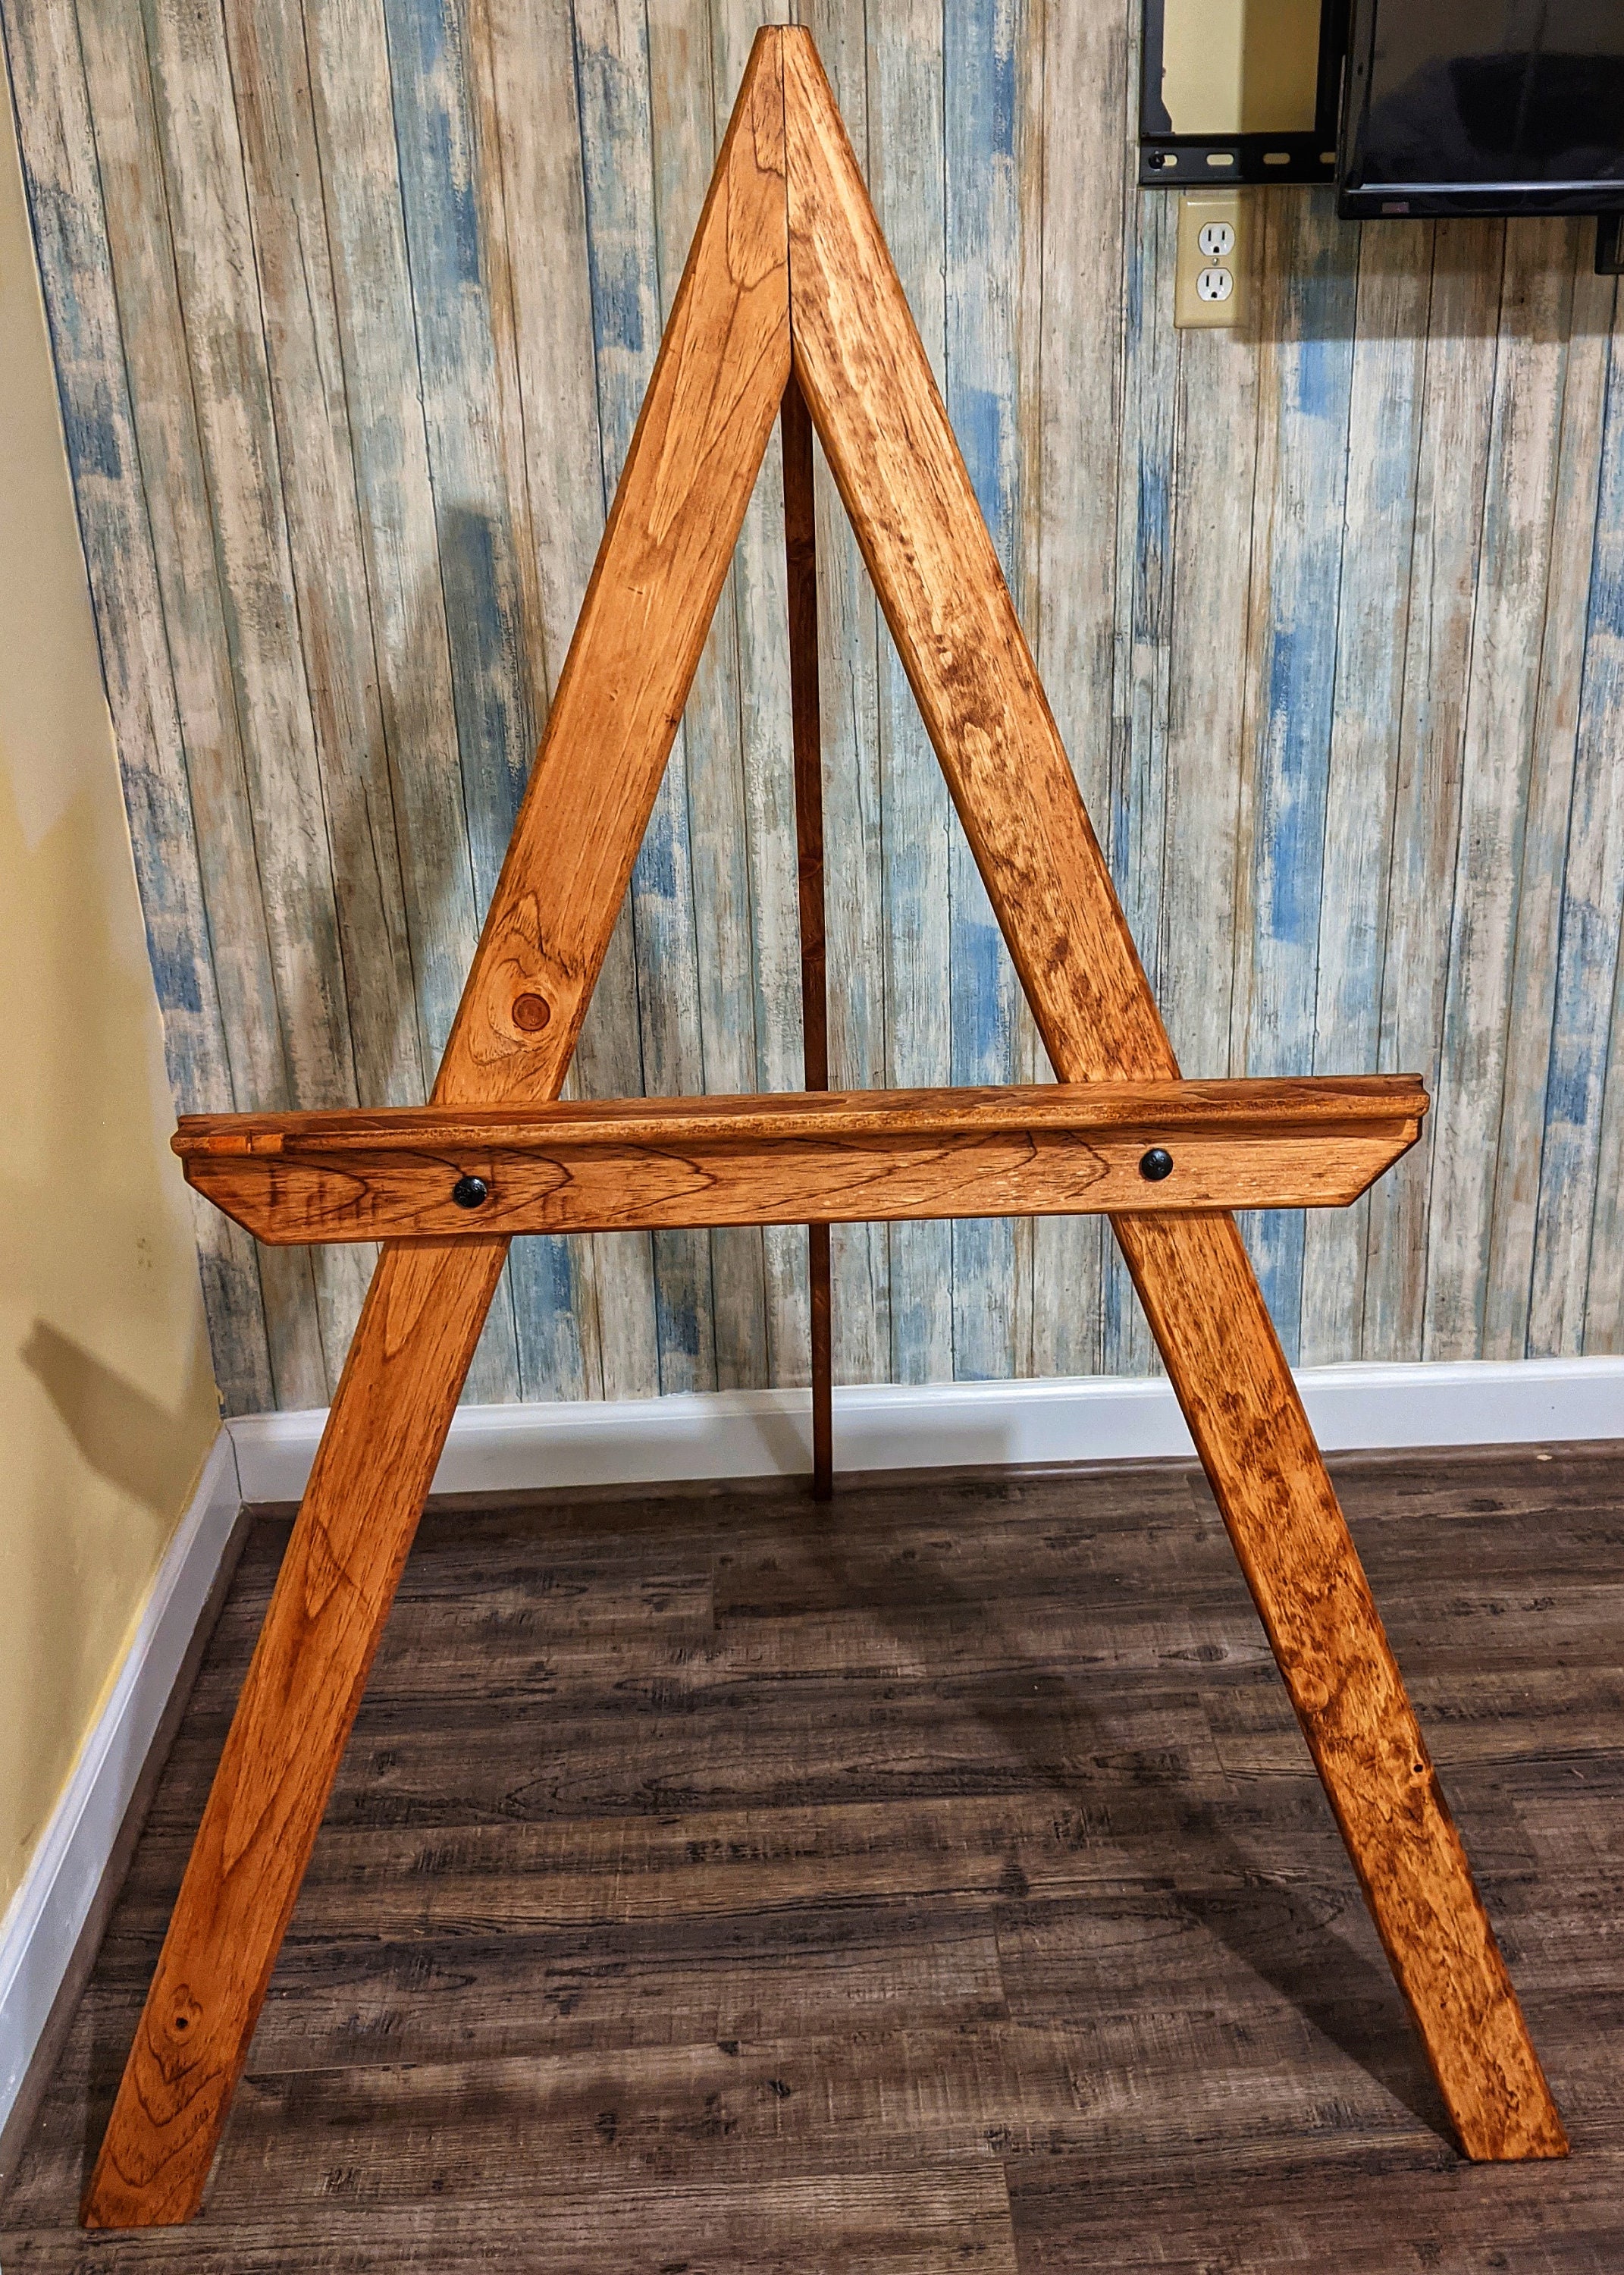 Large Easel Natural Brown 14 x 6.5 Rustic Pine Wood Decorative Display Stand